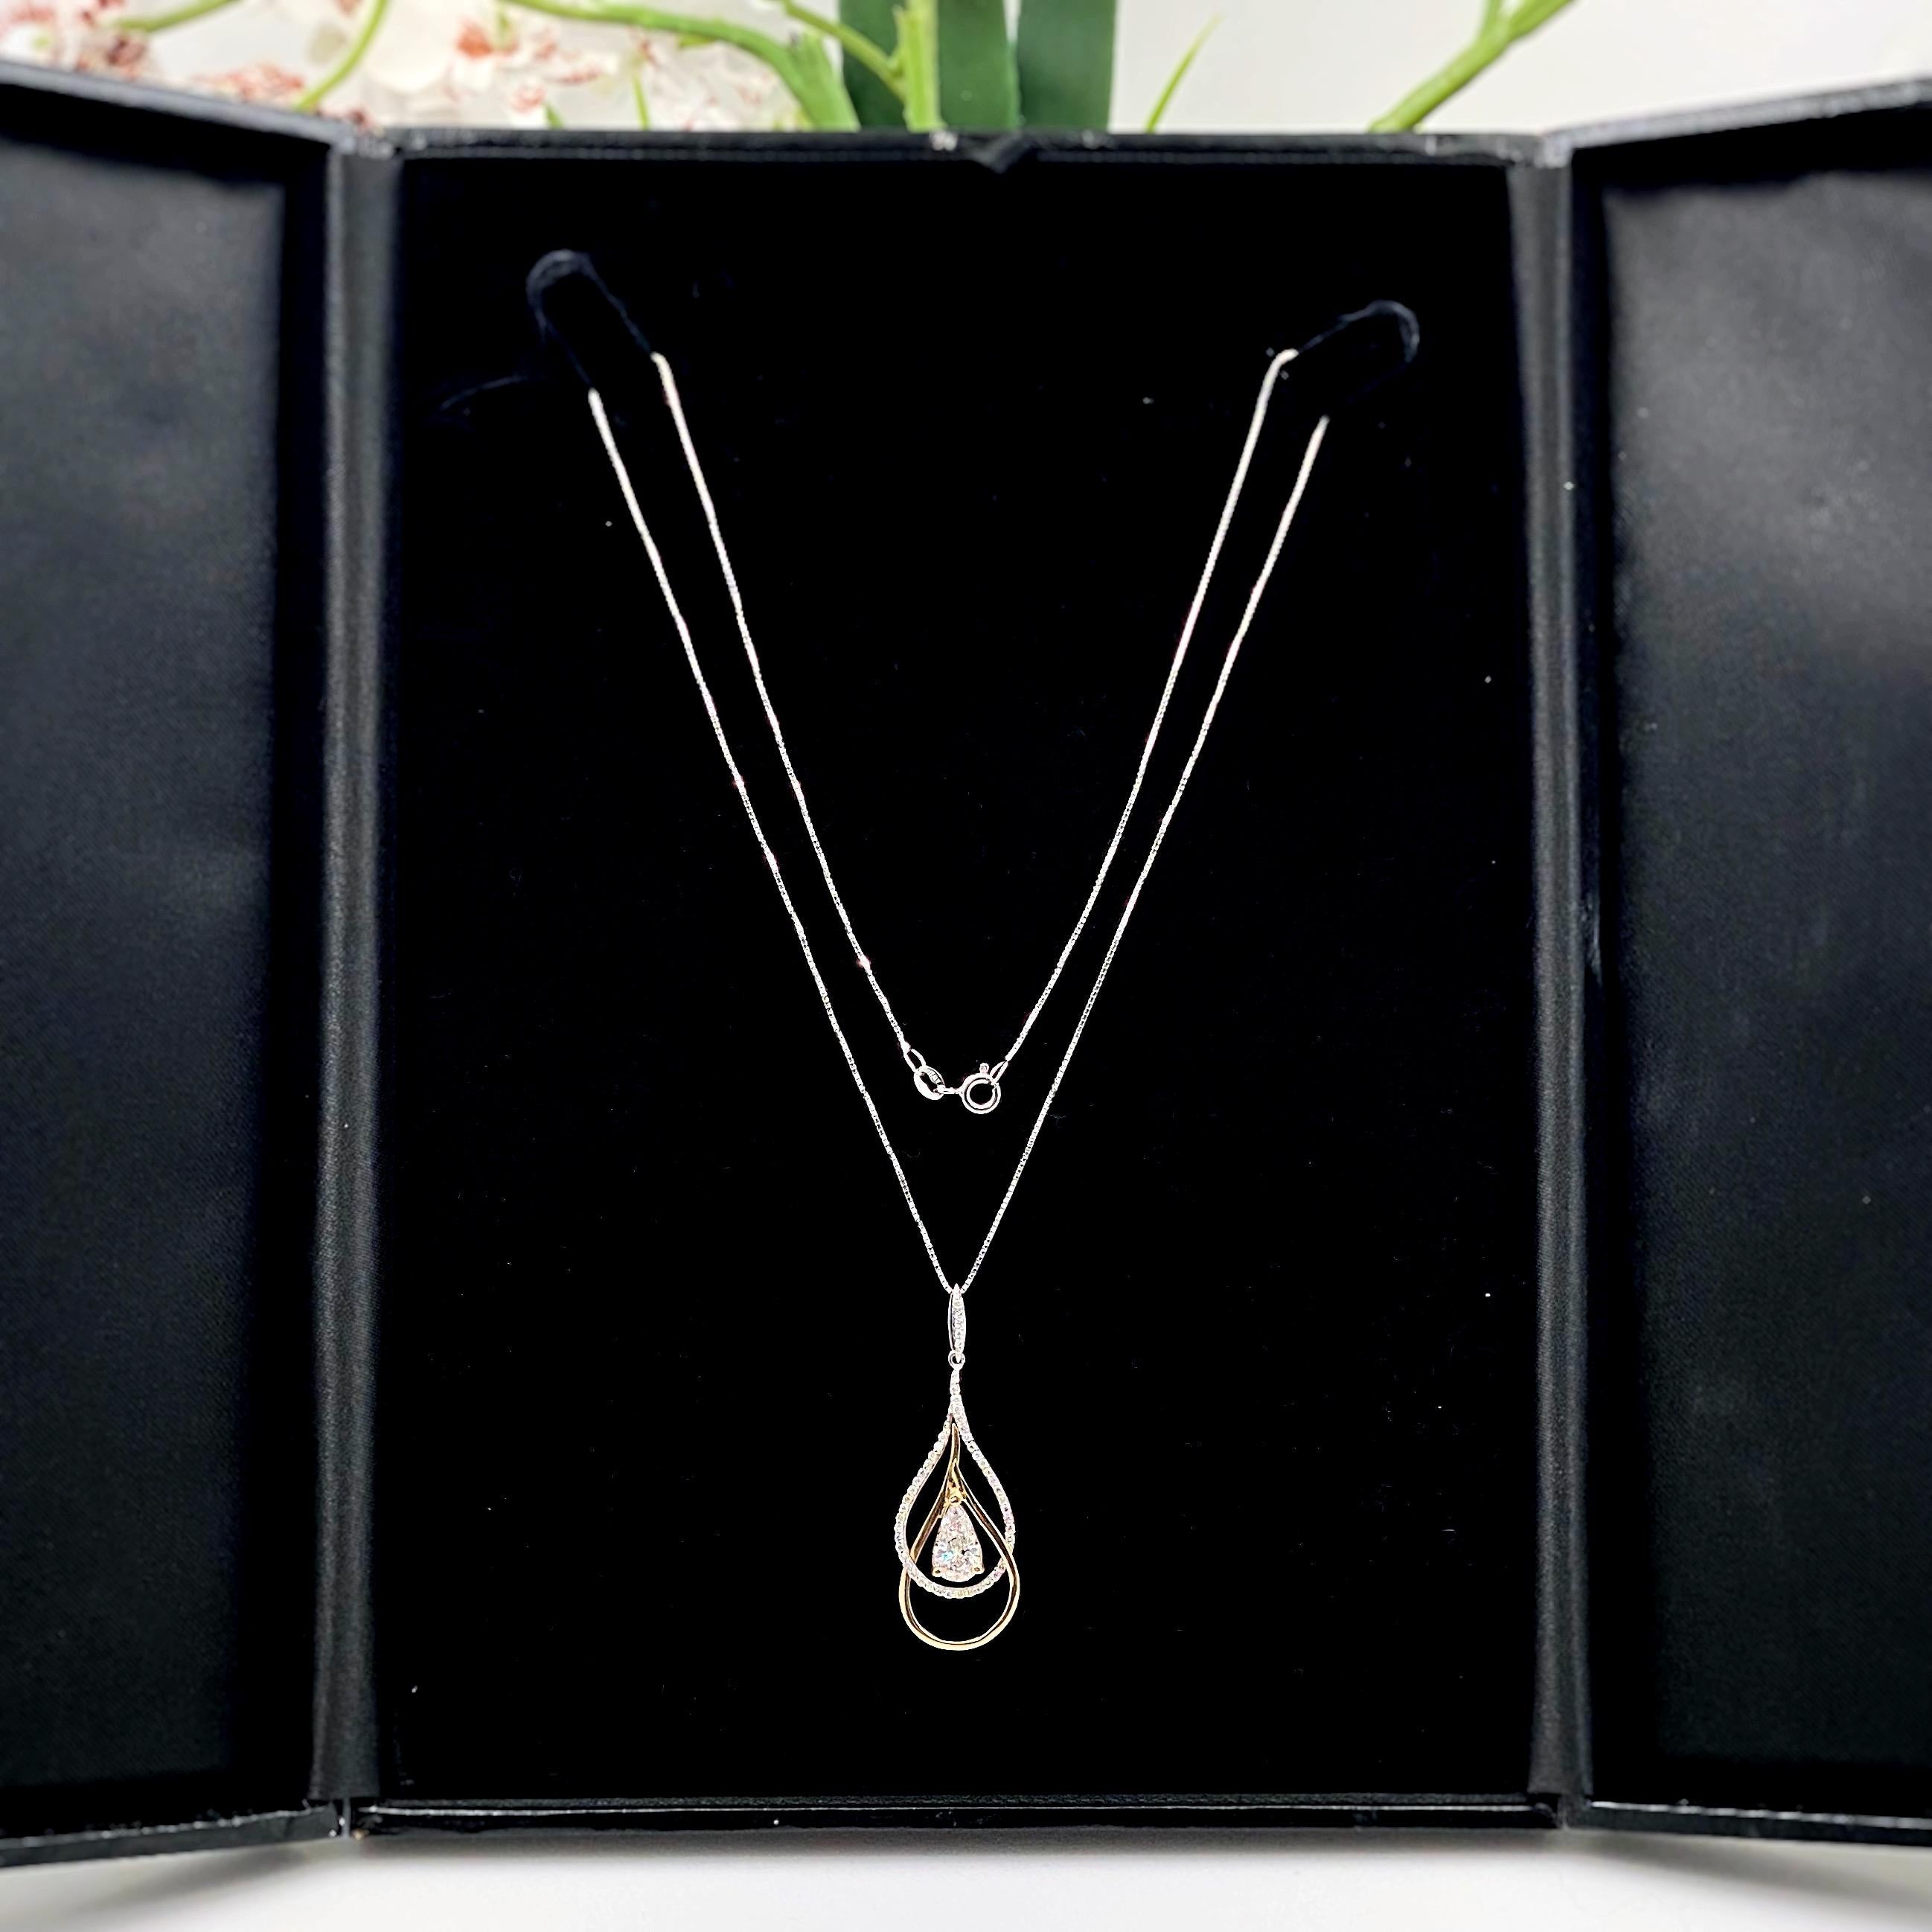 Pear Shape Diamond Pendant Necklace
Style:  Tear Drop
Metal:  14kt White & Yellow Gold
Size:  Chain is 18' inches
Pendant:  1.75 inches
TCW:  1.41 tcw
Main Diamond:  Pear Shape Diamond 1.16 cts
Color & Clarity:  F - I1
Accent Diamonds:  50 Round